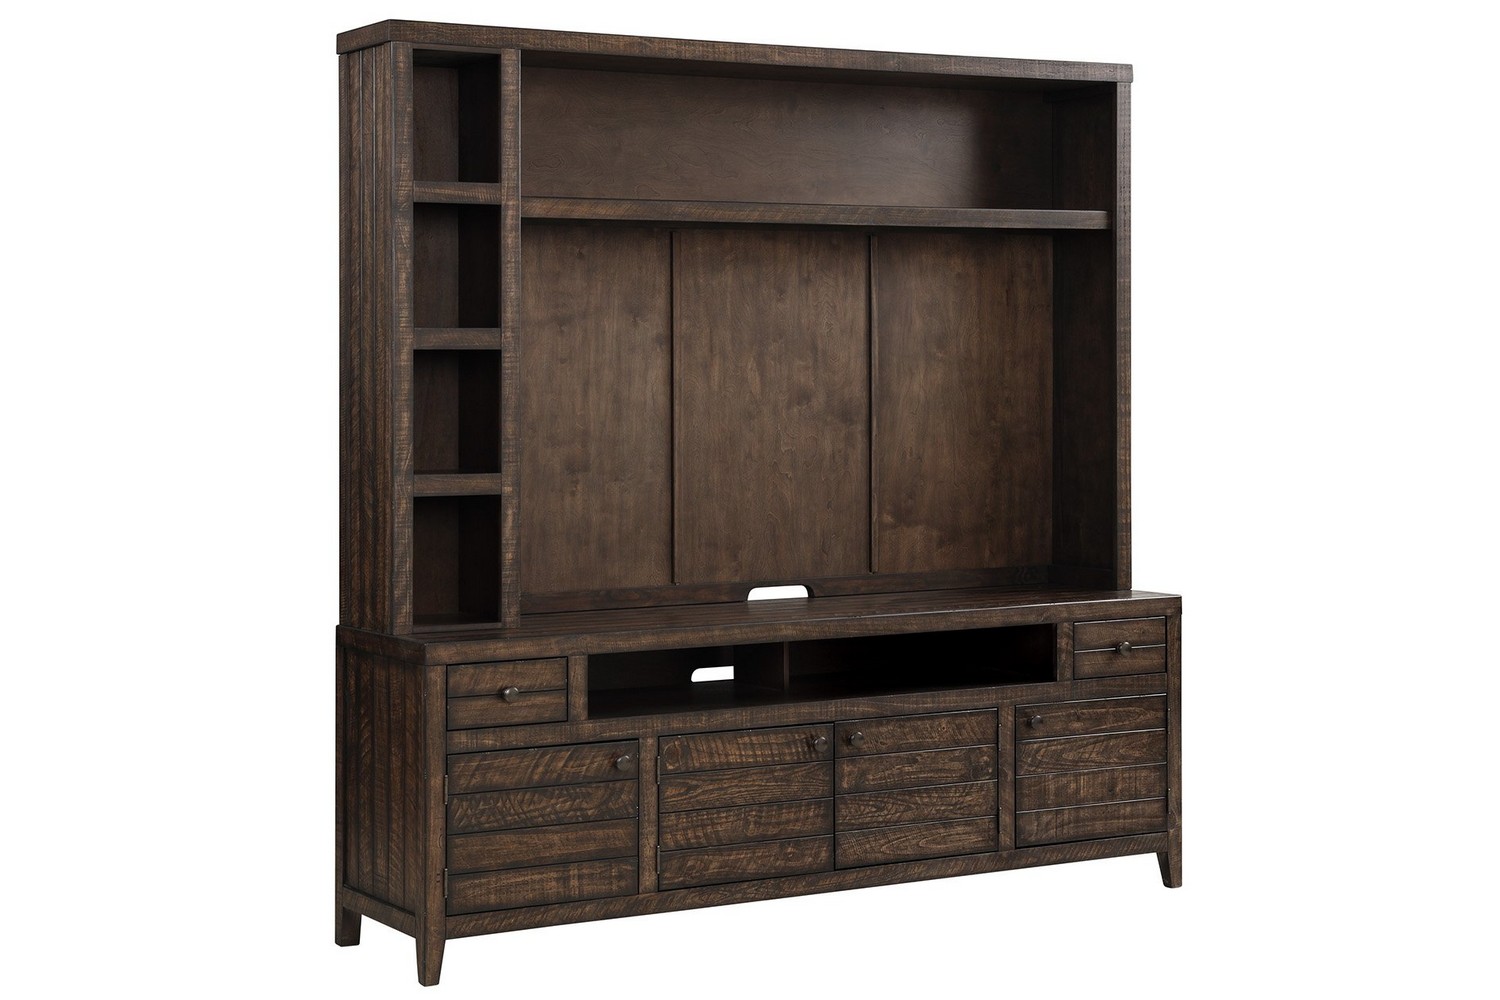 Parker House Tempe 84 Inch TV Console with Hutch and Back Panel - Tobacco